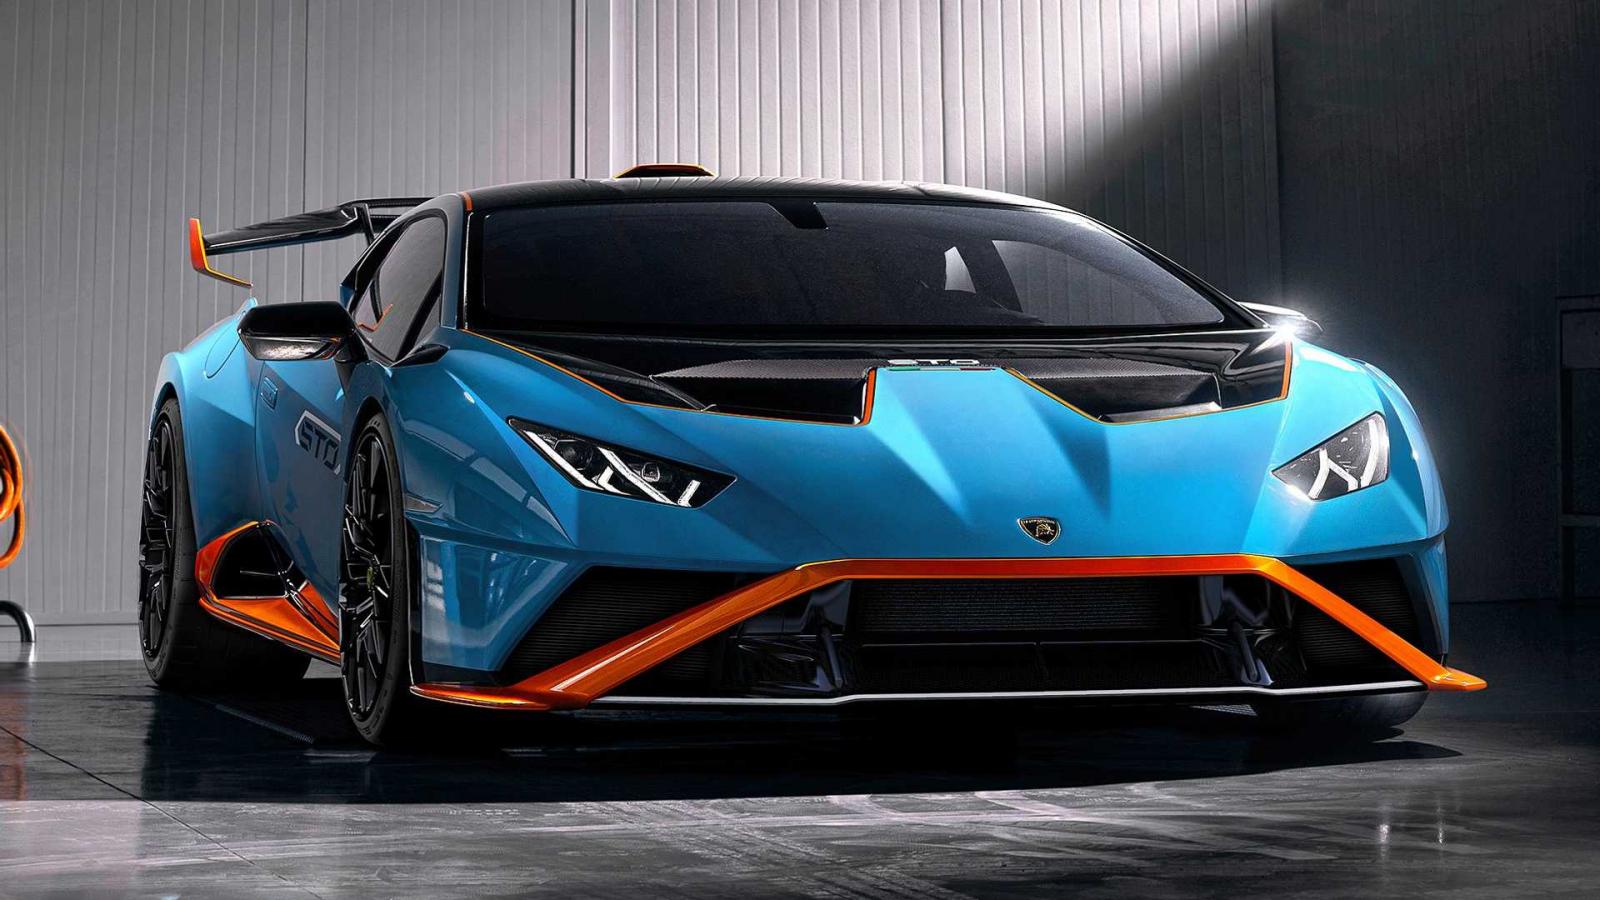 630-hp Lamborghini Huracan STO only weighs as much as a Ford Focus